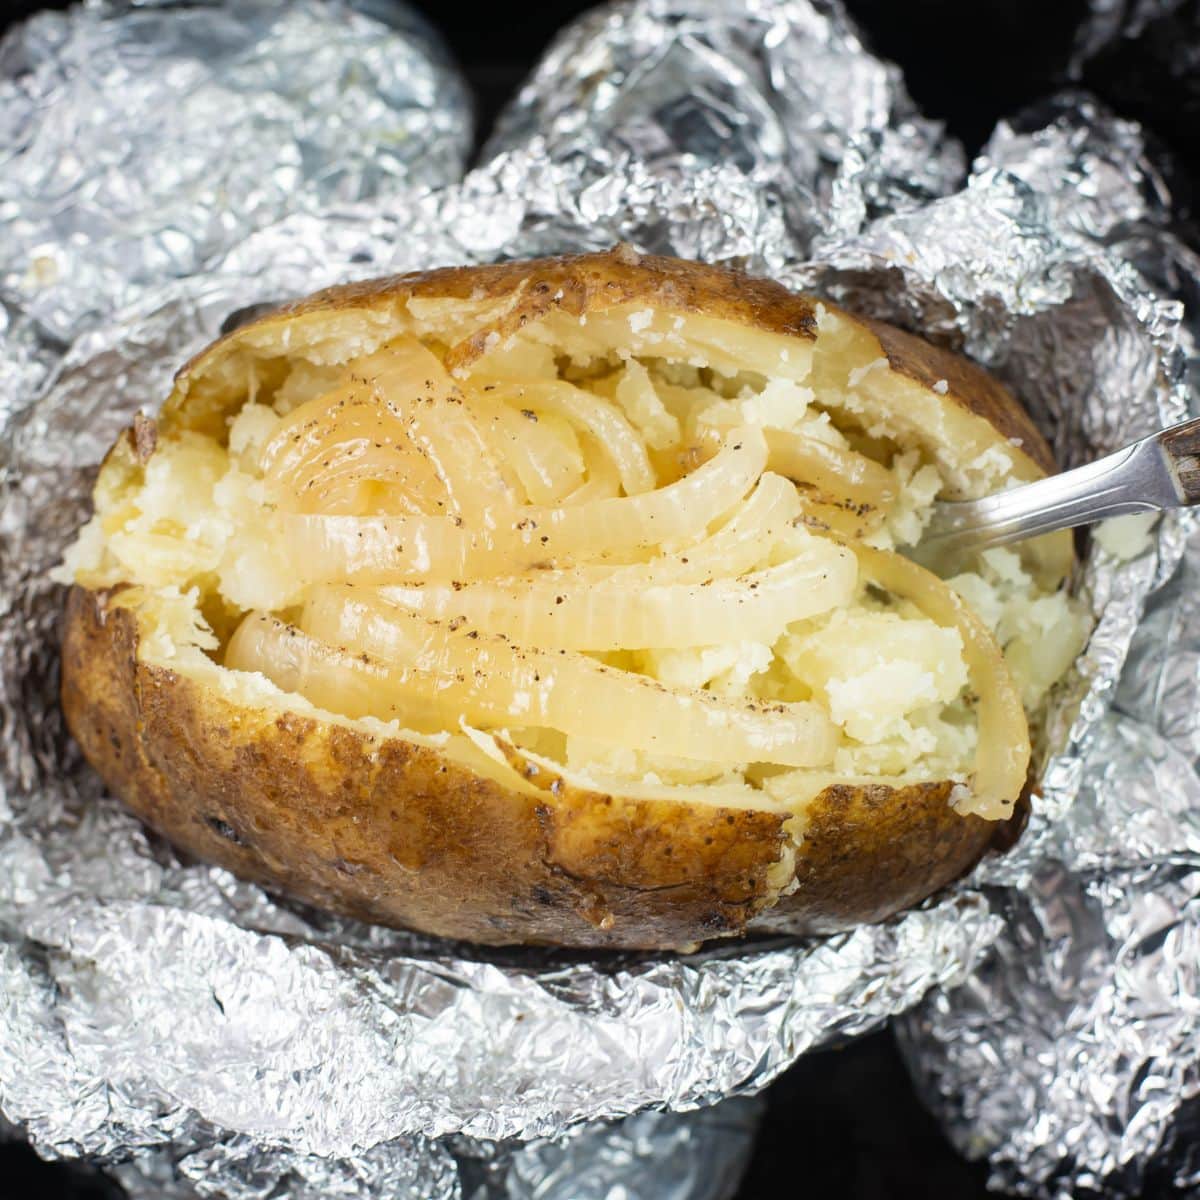 Overhead image of a baked potato cut open down the middle with sliced onion and melted butter.